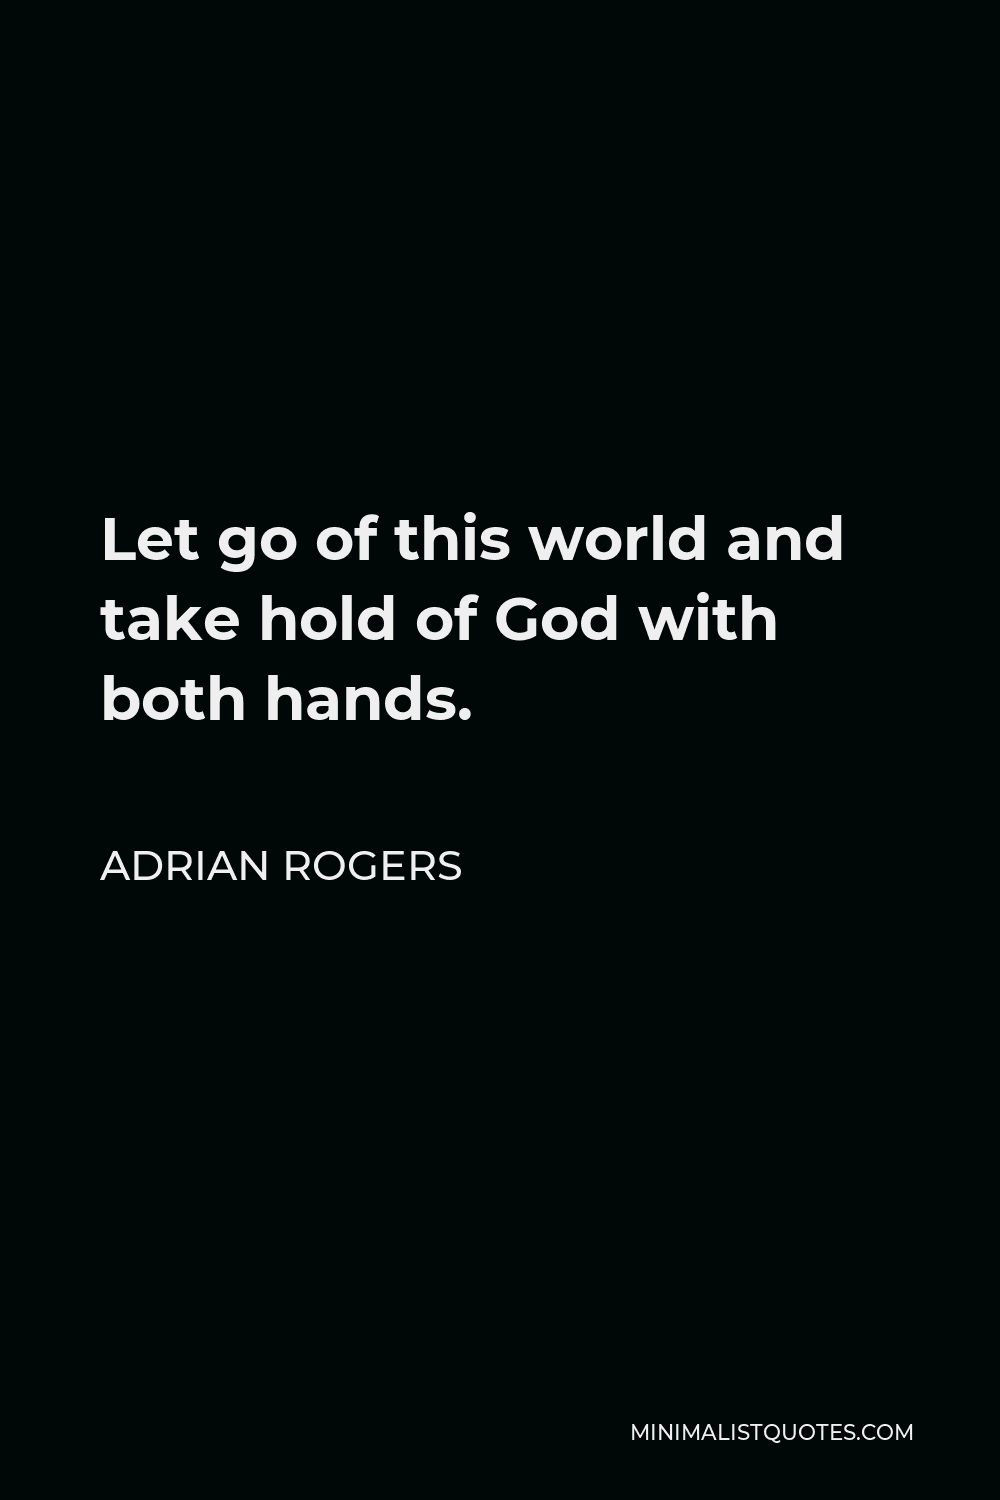 Adrian Rogers Quote - Let go of this world and take hold of God with both hands.